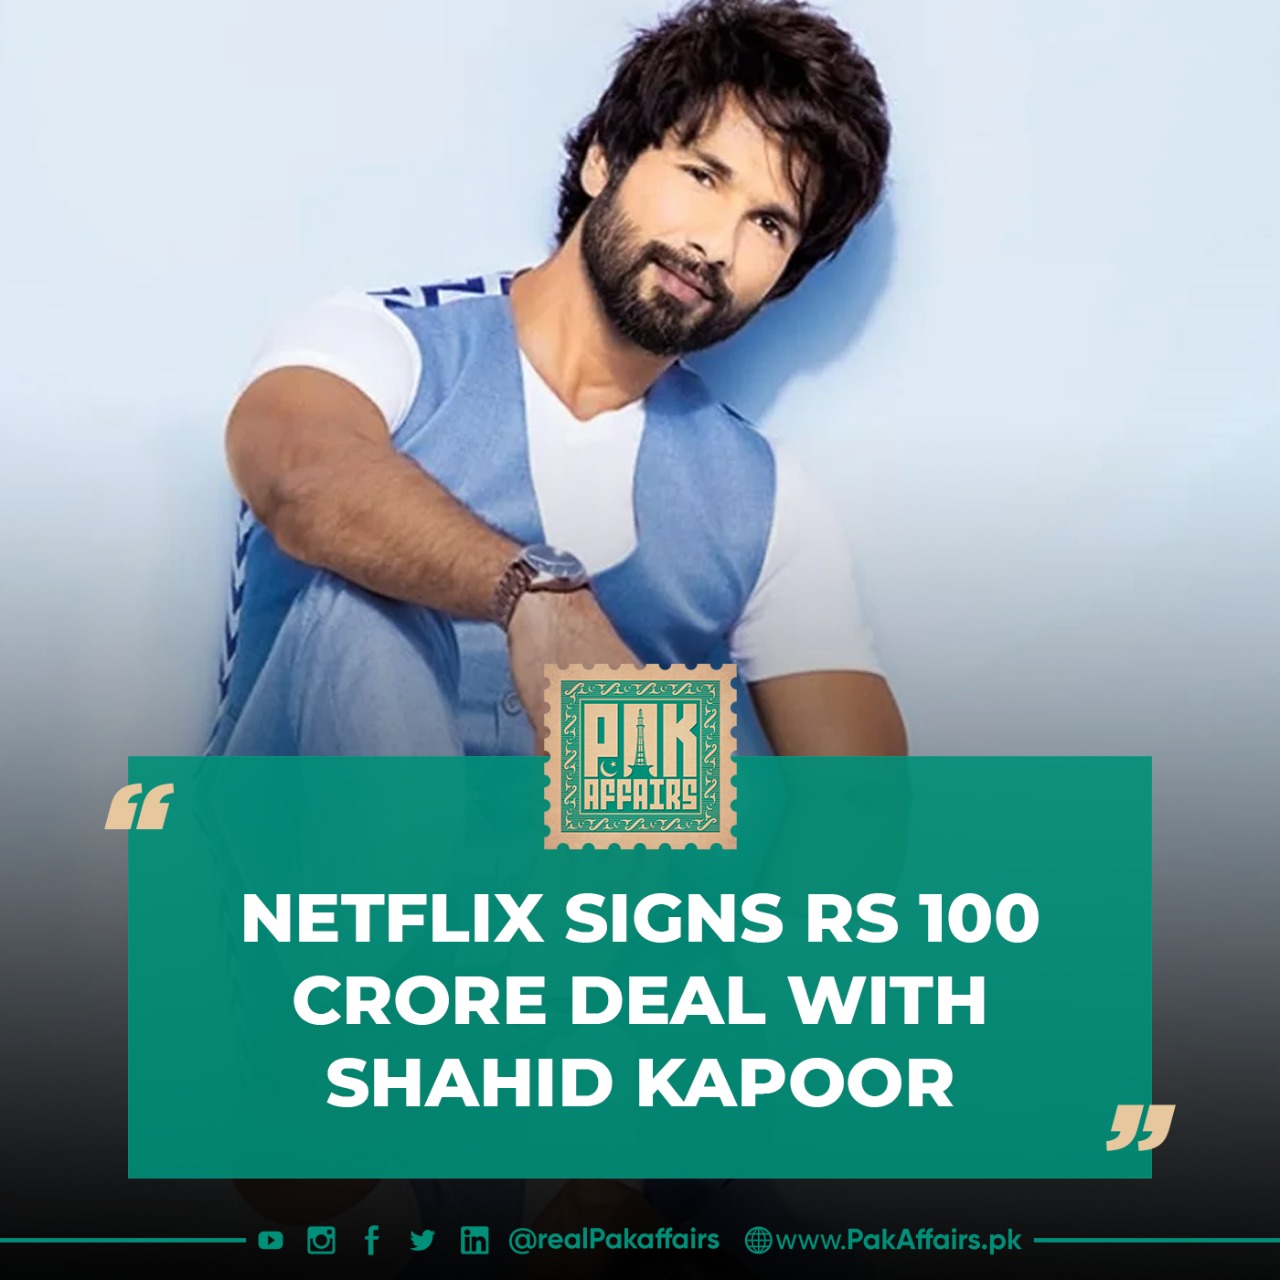 Netflix signs Rs 100 crore deal with Shahid Kapoor